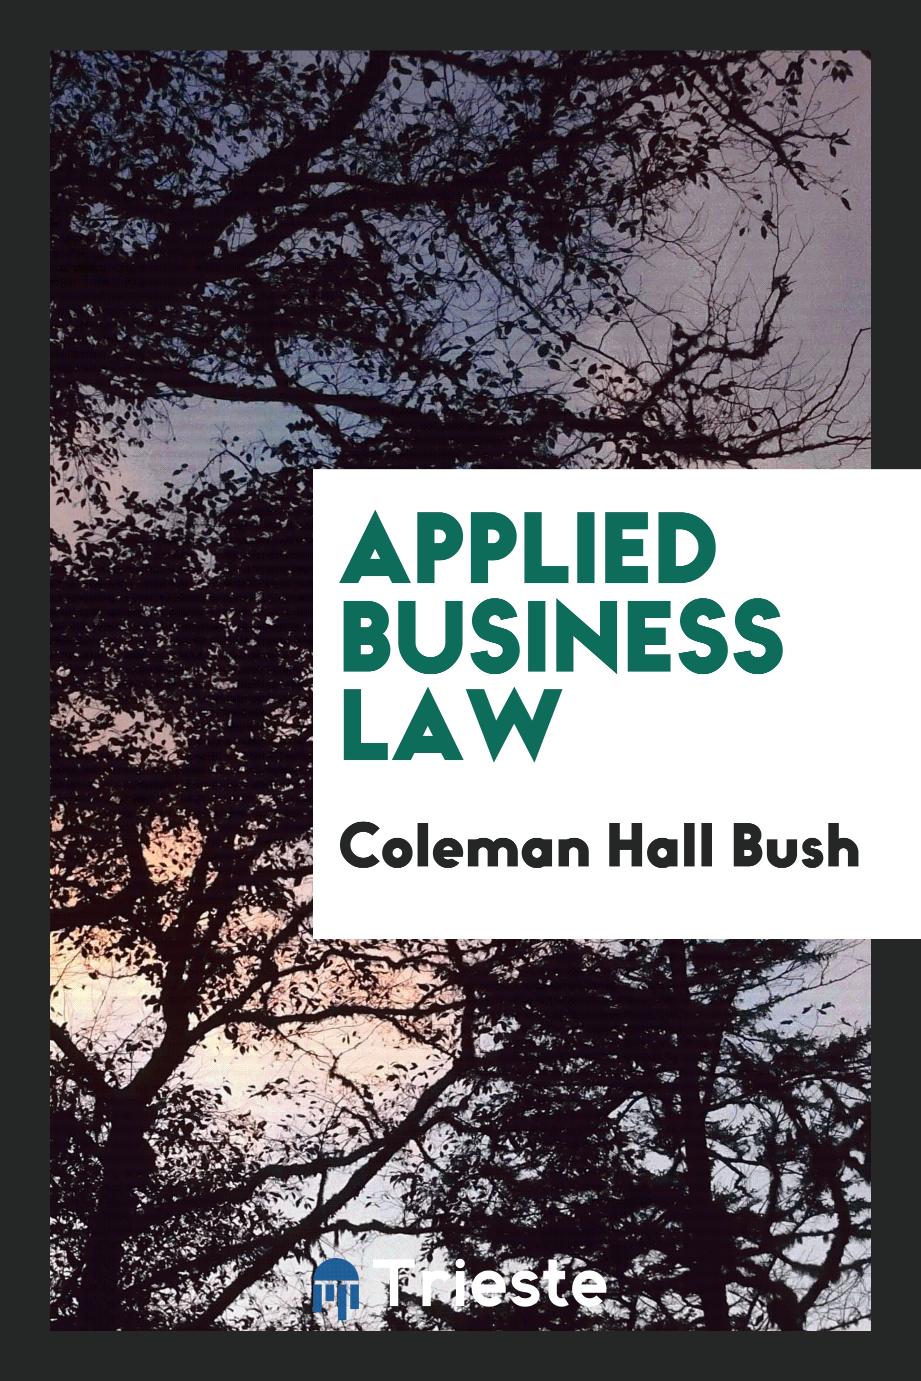 Applied business law